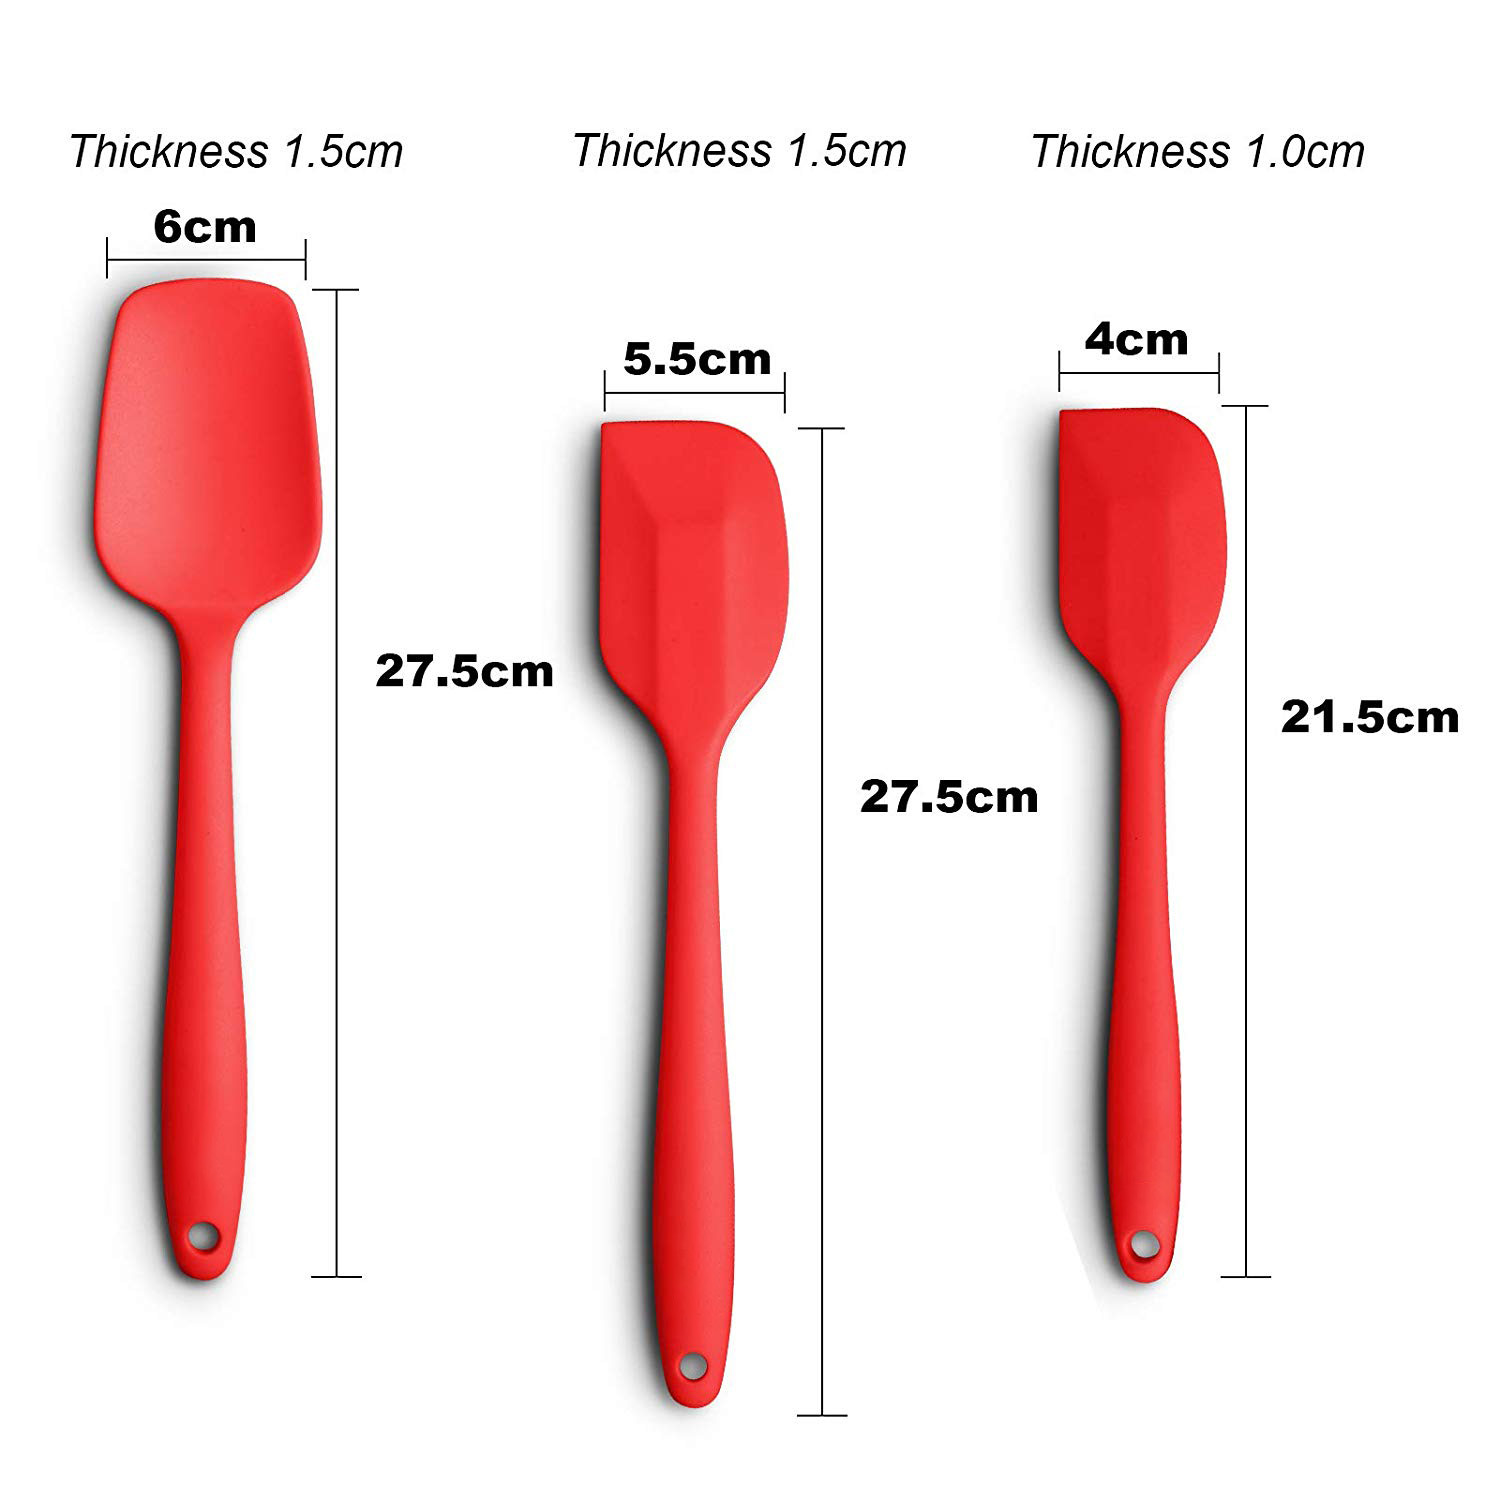 Silicone Spatula 3-piece Set, High Heat-Resistant Pro-Grade Spatulas, Non-stick Rubber Spatulas with Stainless Steel Core, Red, I2341 - image 2 of 7